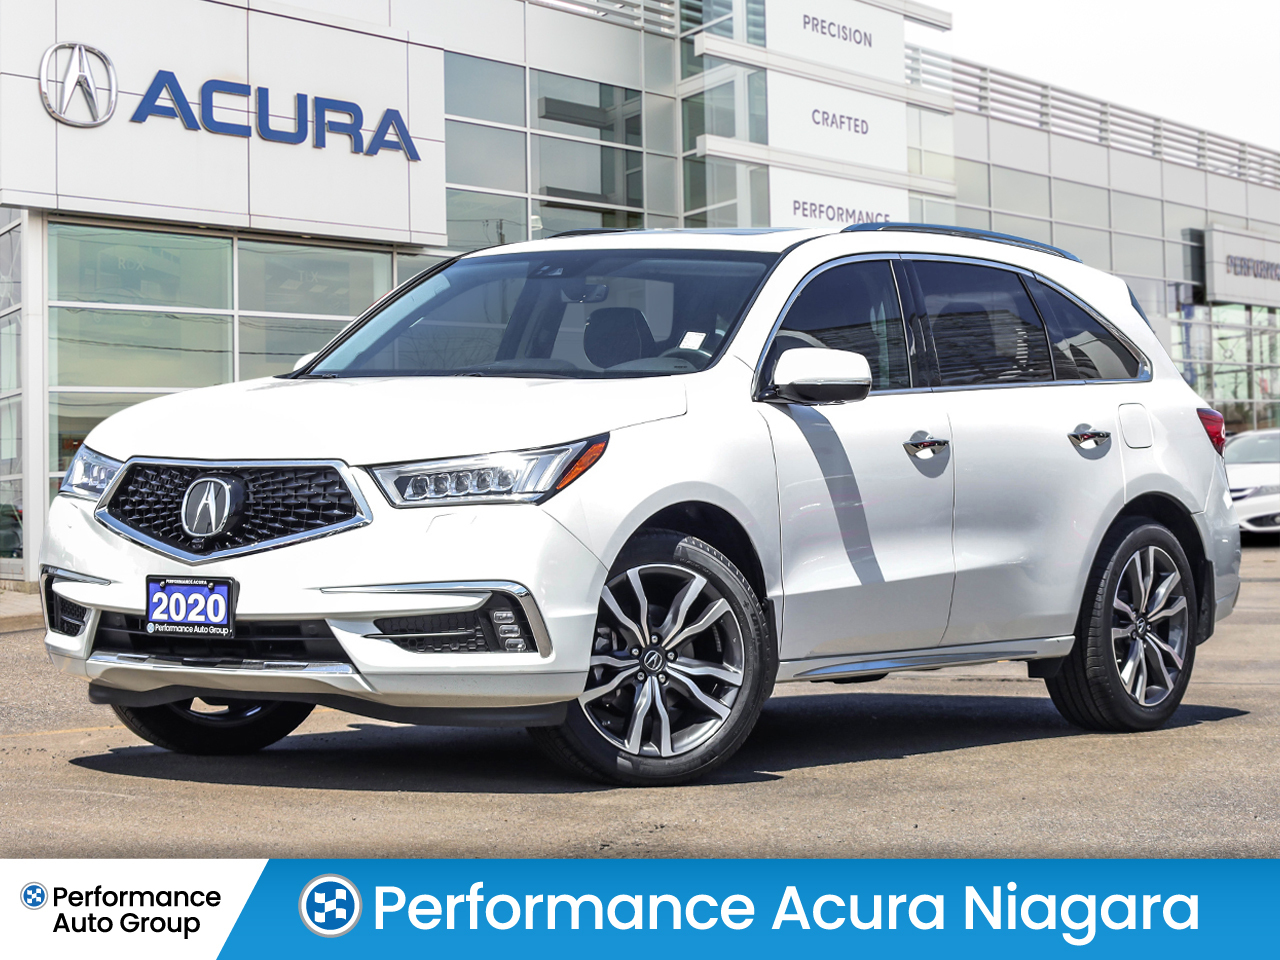 2020 Acura MDX SOLD - PENDING DELIVERY